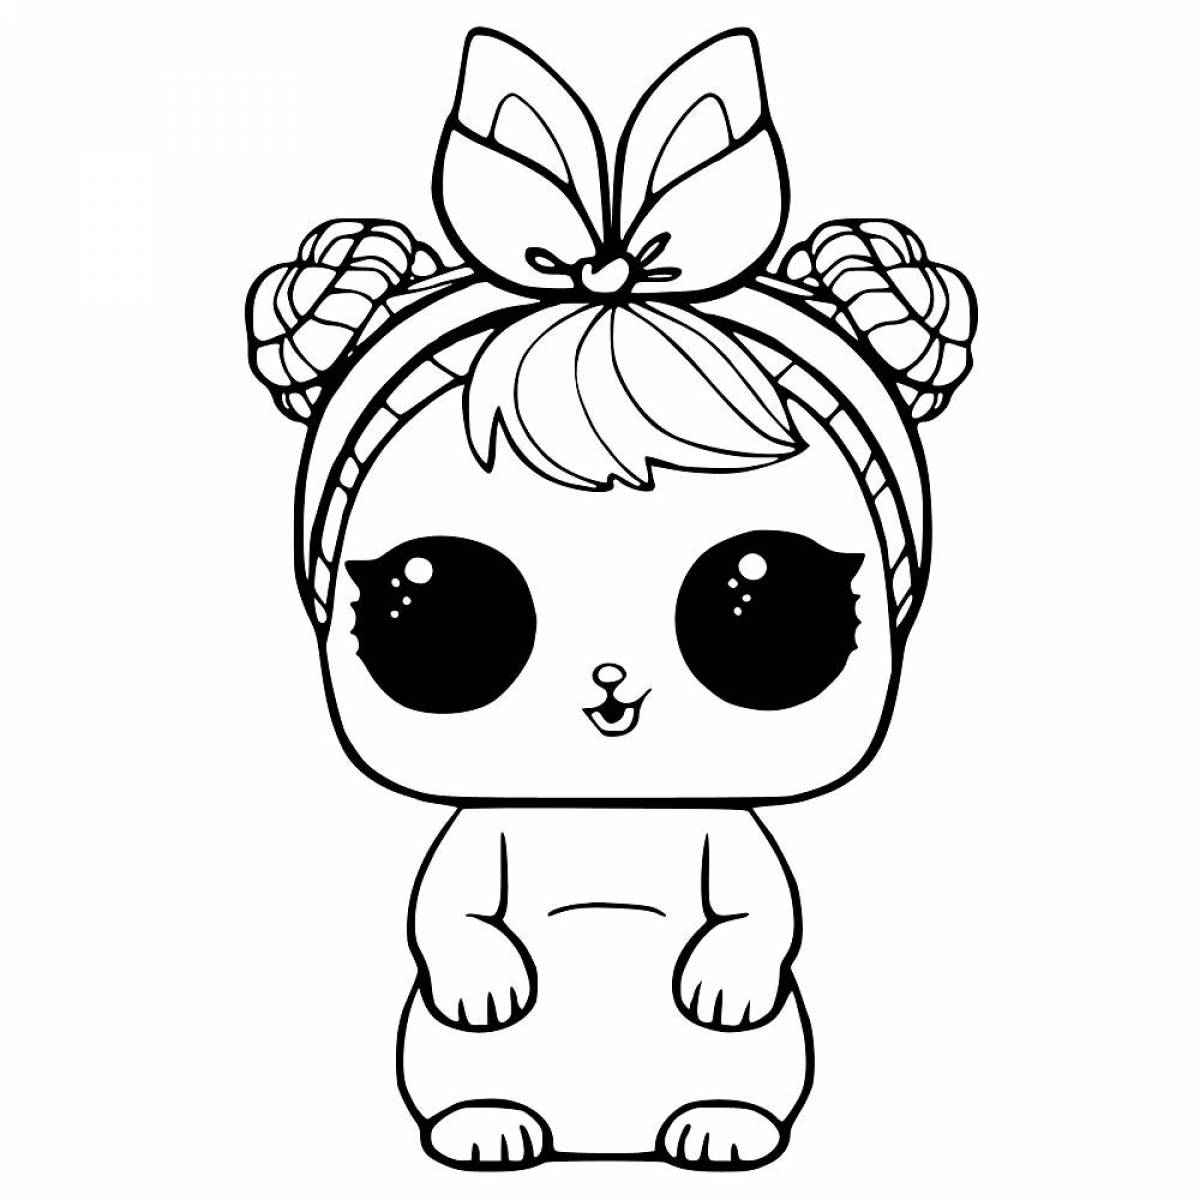 Colorful lola coloring page